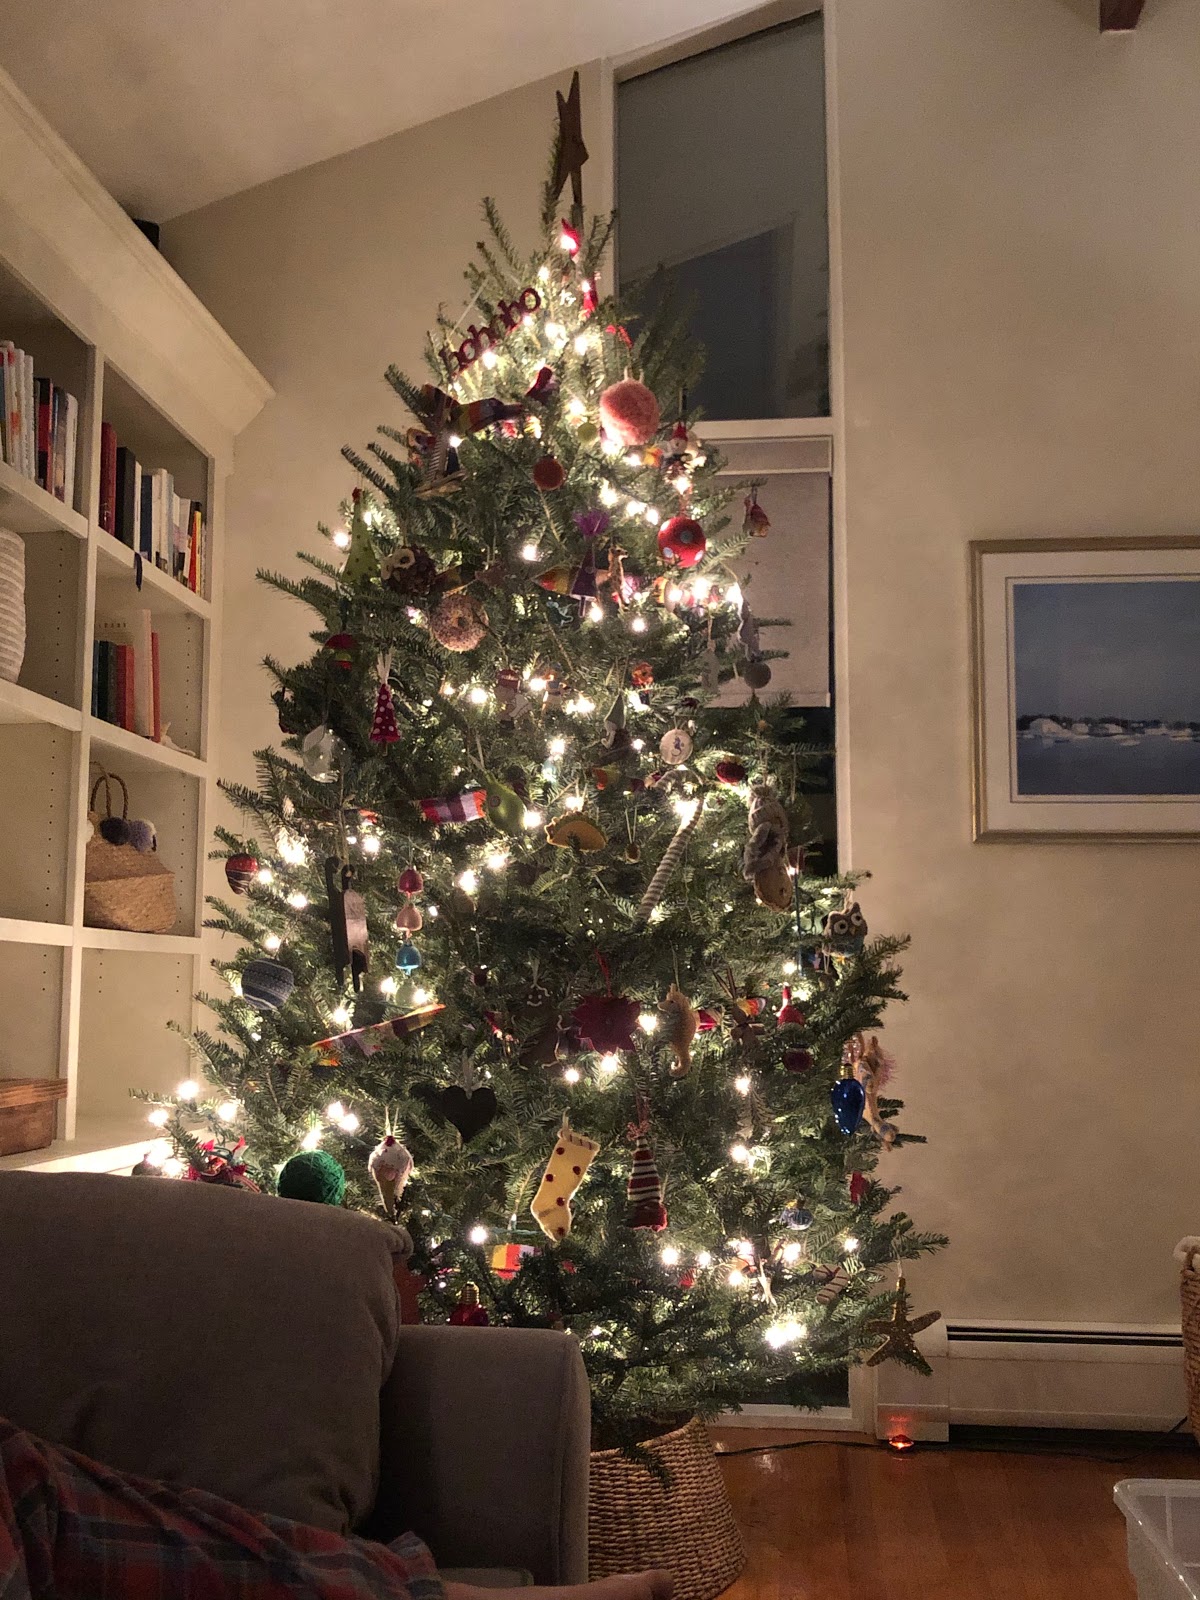 A Christmas tree stands alight in the corner of a living room in front of a comfy armchair